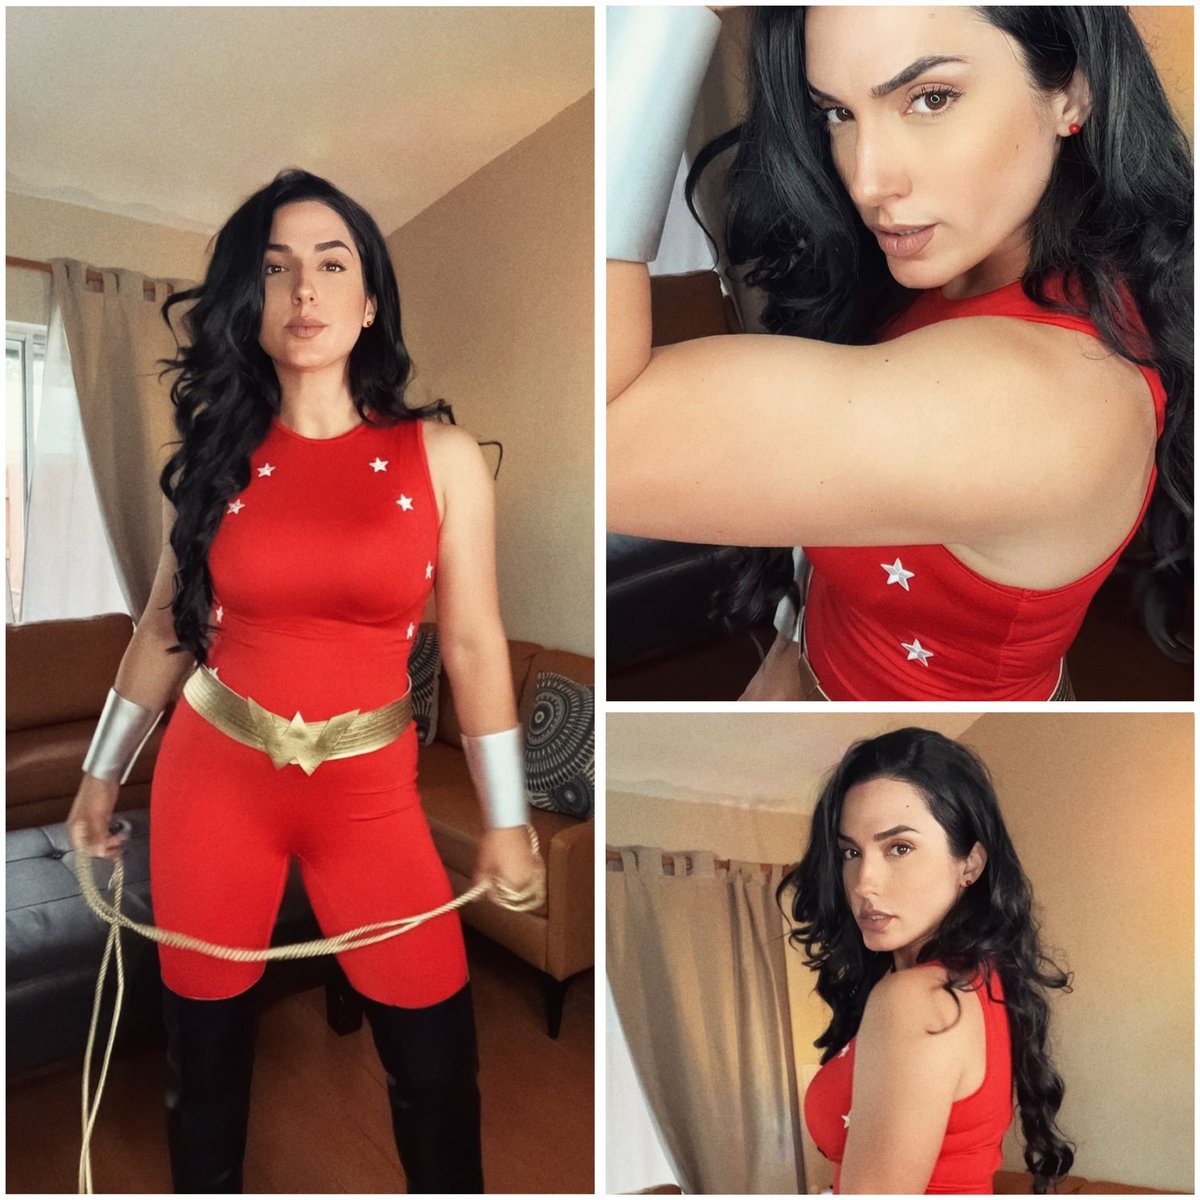 My Donna Troy classic cosplay is done. I had fun making it ❤️🫶🏼 #dccomics